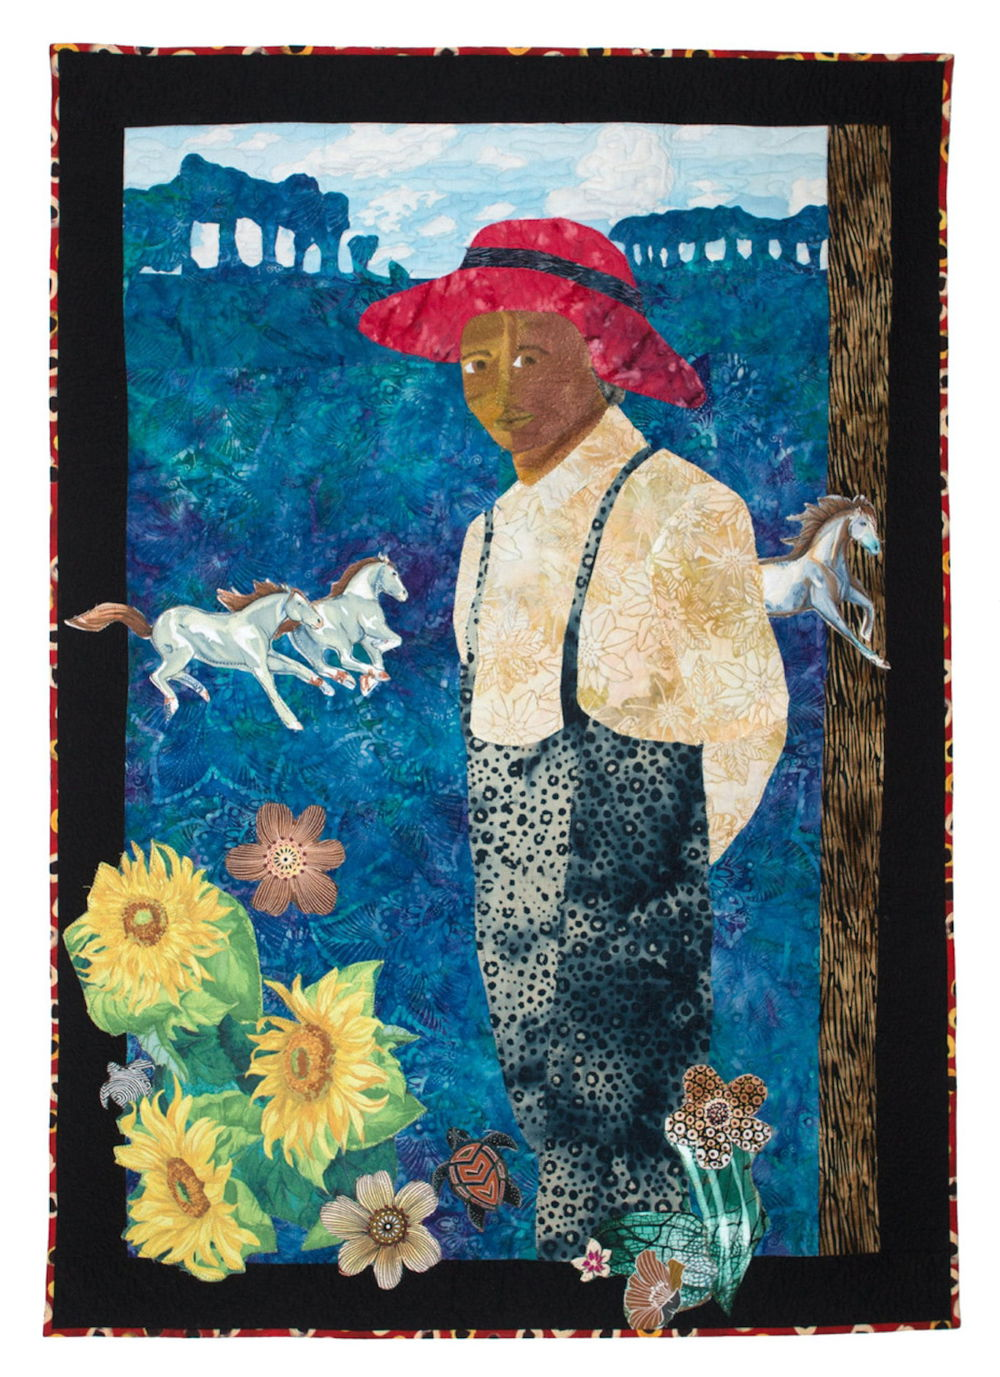 A colorful quilt depicting a Black figure wearing overalls and a red hat looking out at the viewer. Behind the figure, three white horses run across the vast blue landscape. There are flowers at the person's feet.